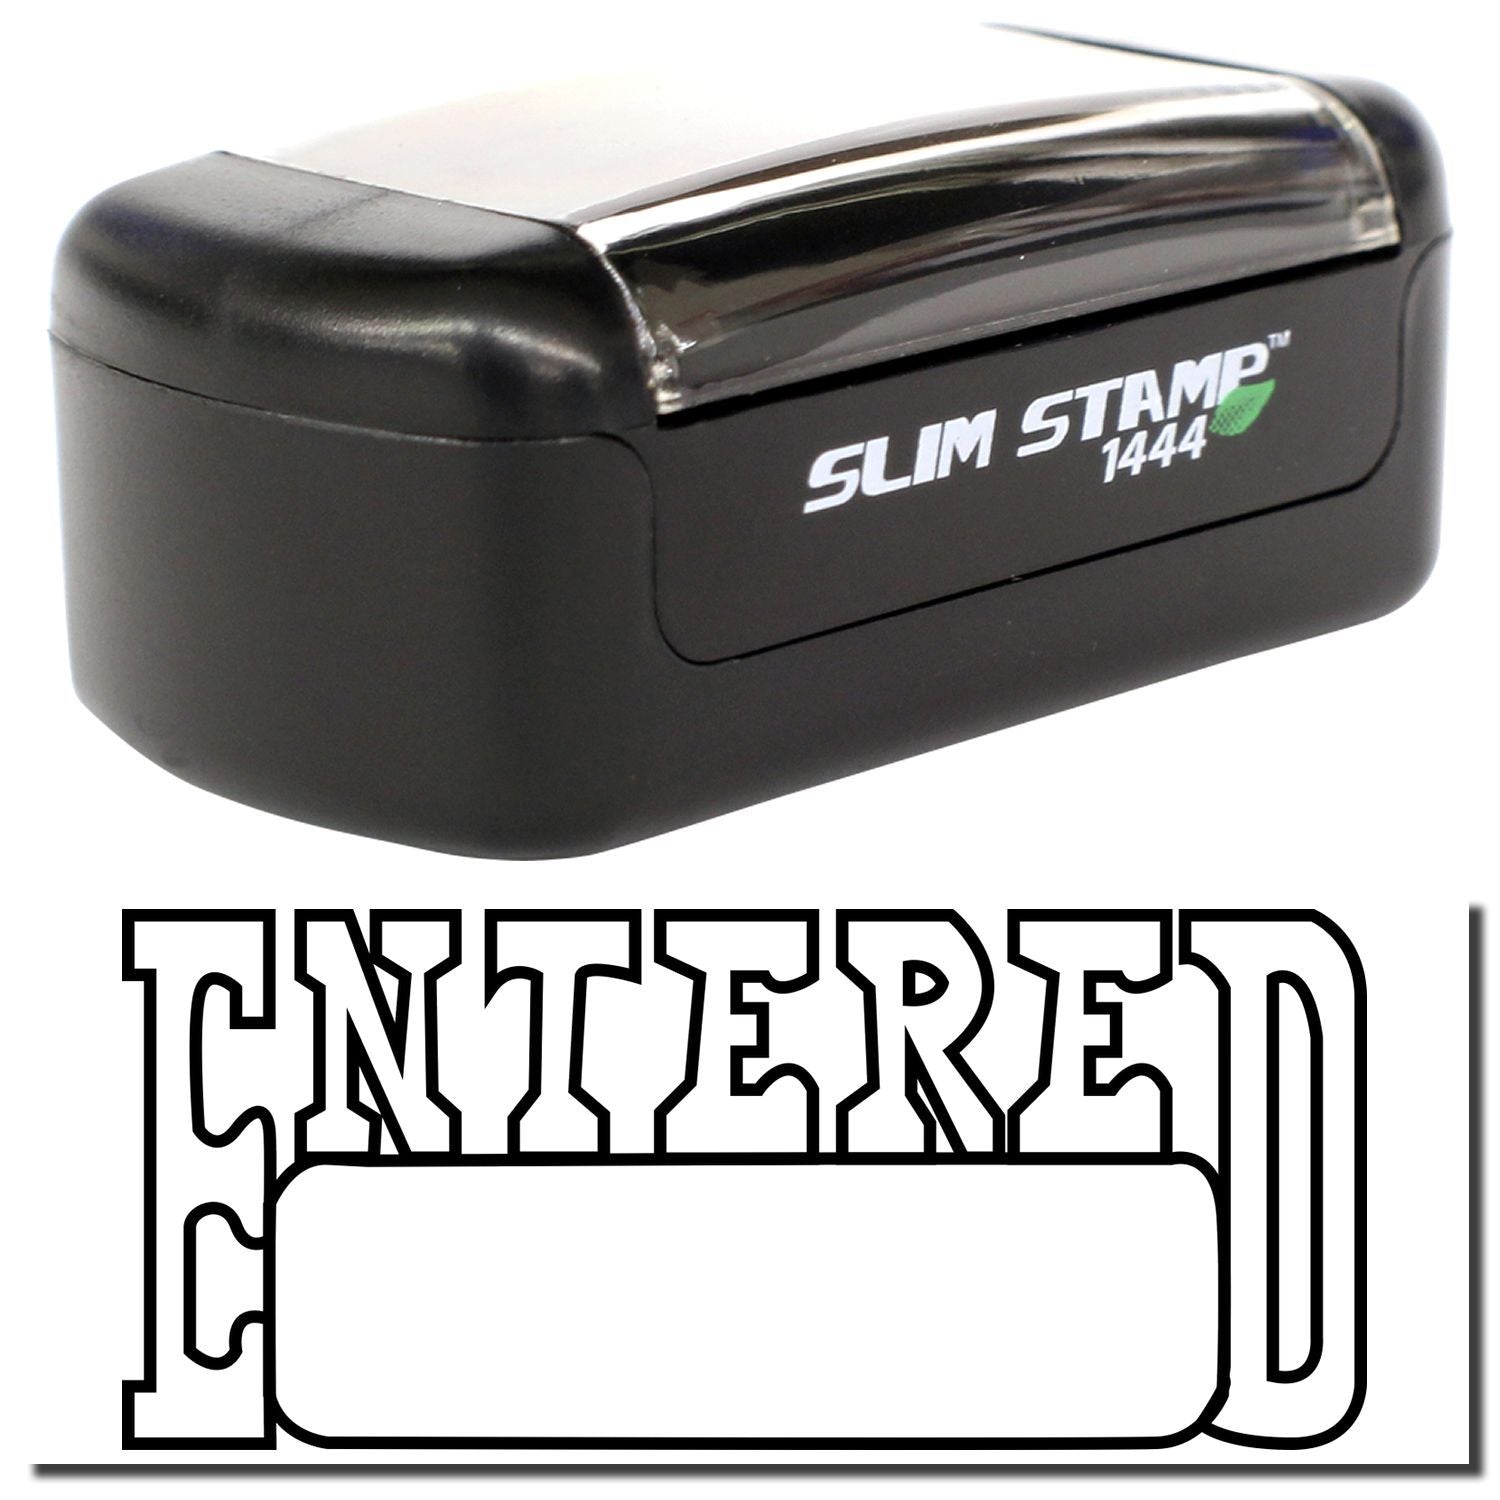 A stock office pre-inked stamp with a stamped image showing how the text "ENTERED" in an outline font with a date box is displayed after stamping.